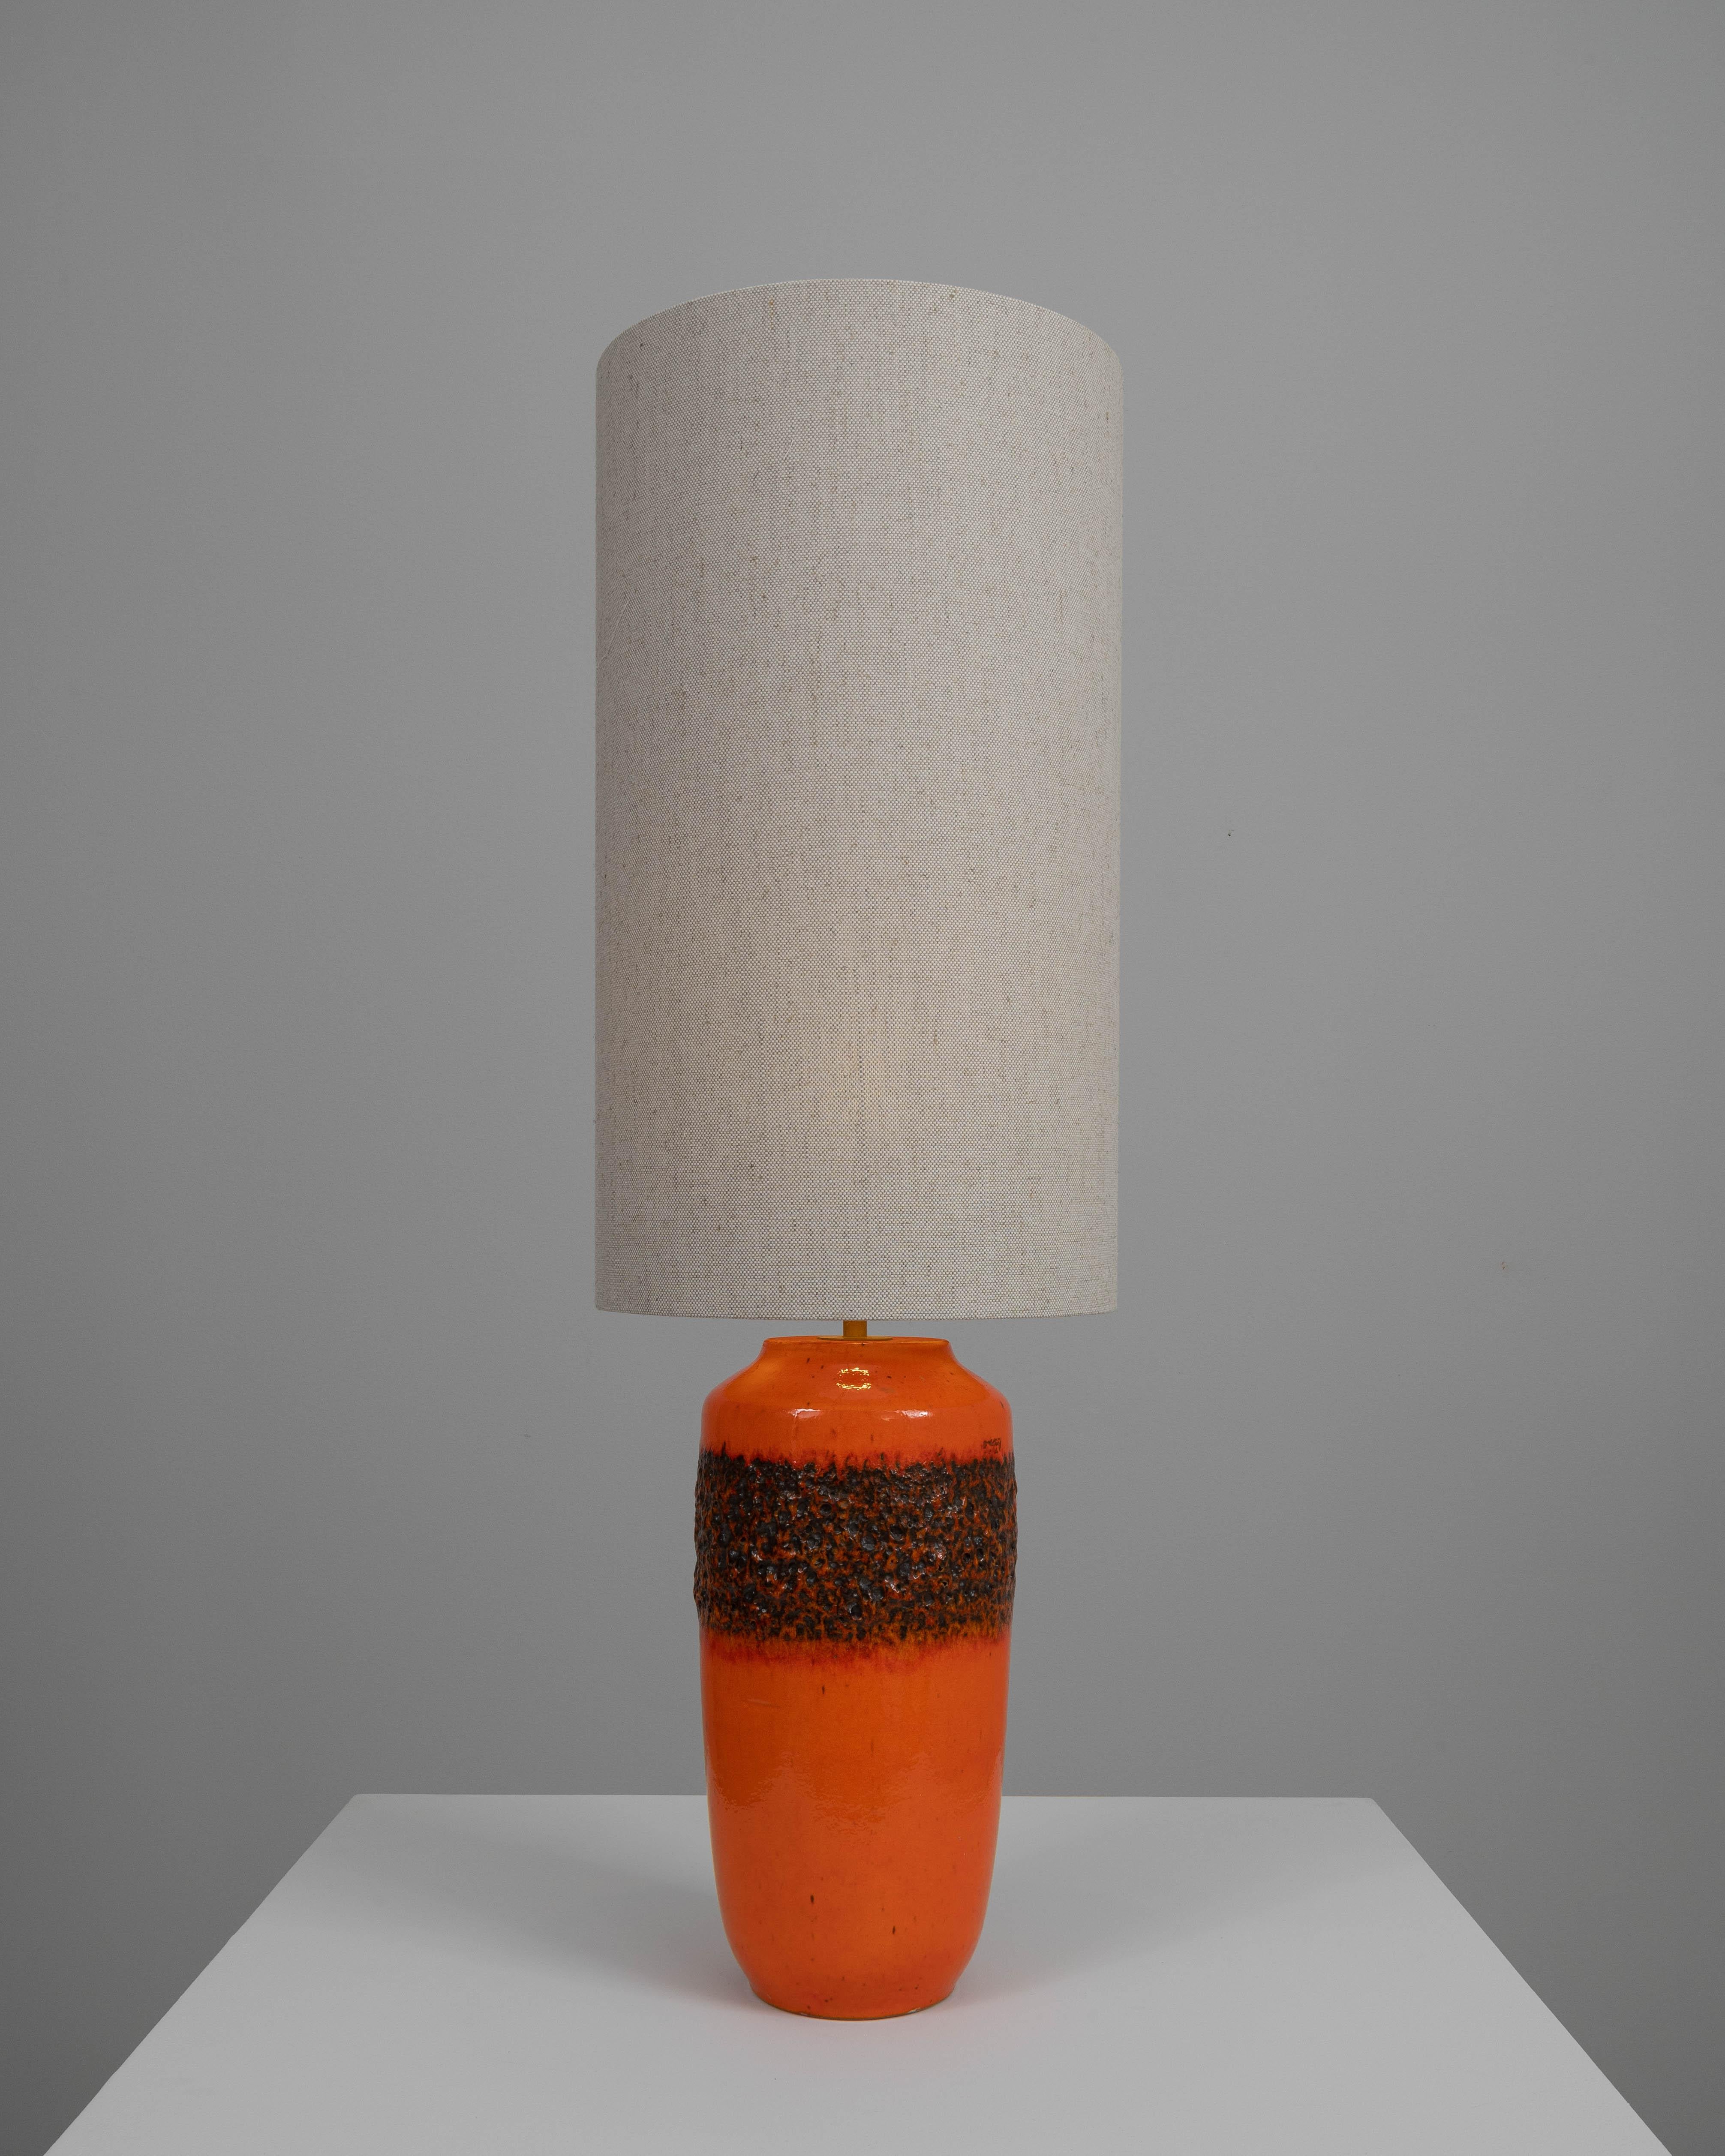 Illuminate your space with a touch of vintage elegance with this early 20th-century British ceramic table lamp. Its vibrant orange glaze and textured mid-section create a striking contrast, making it a standout piece in any room. The tall,